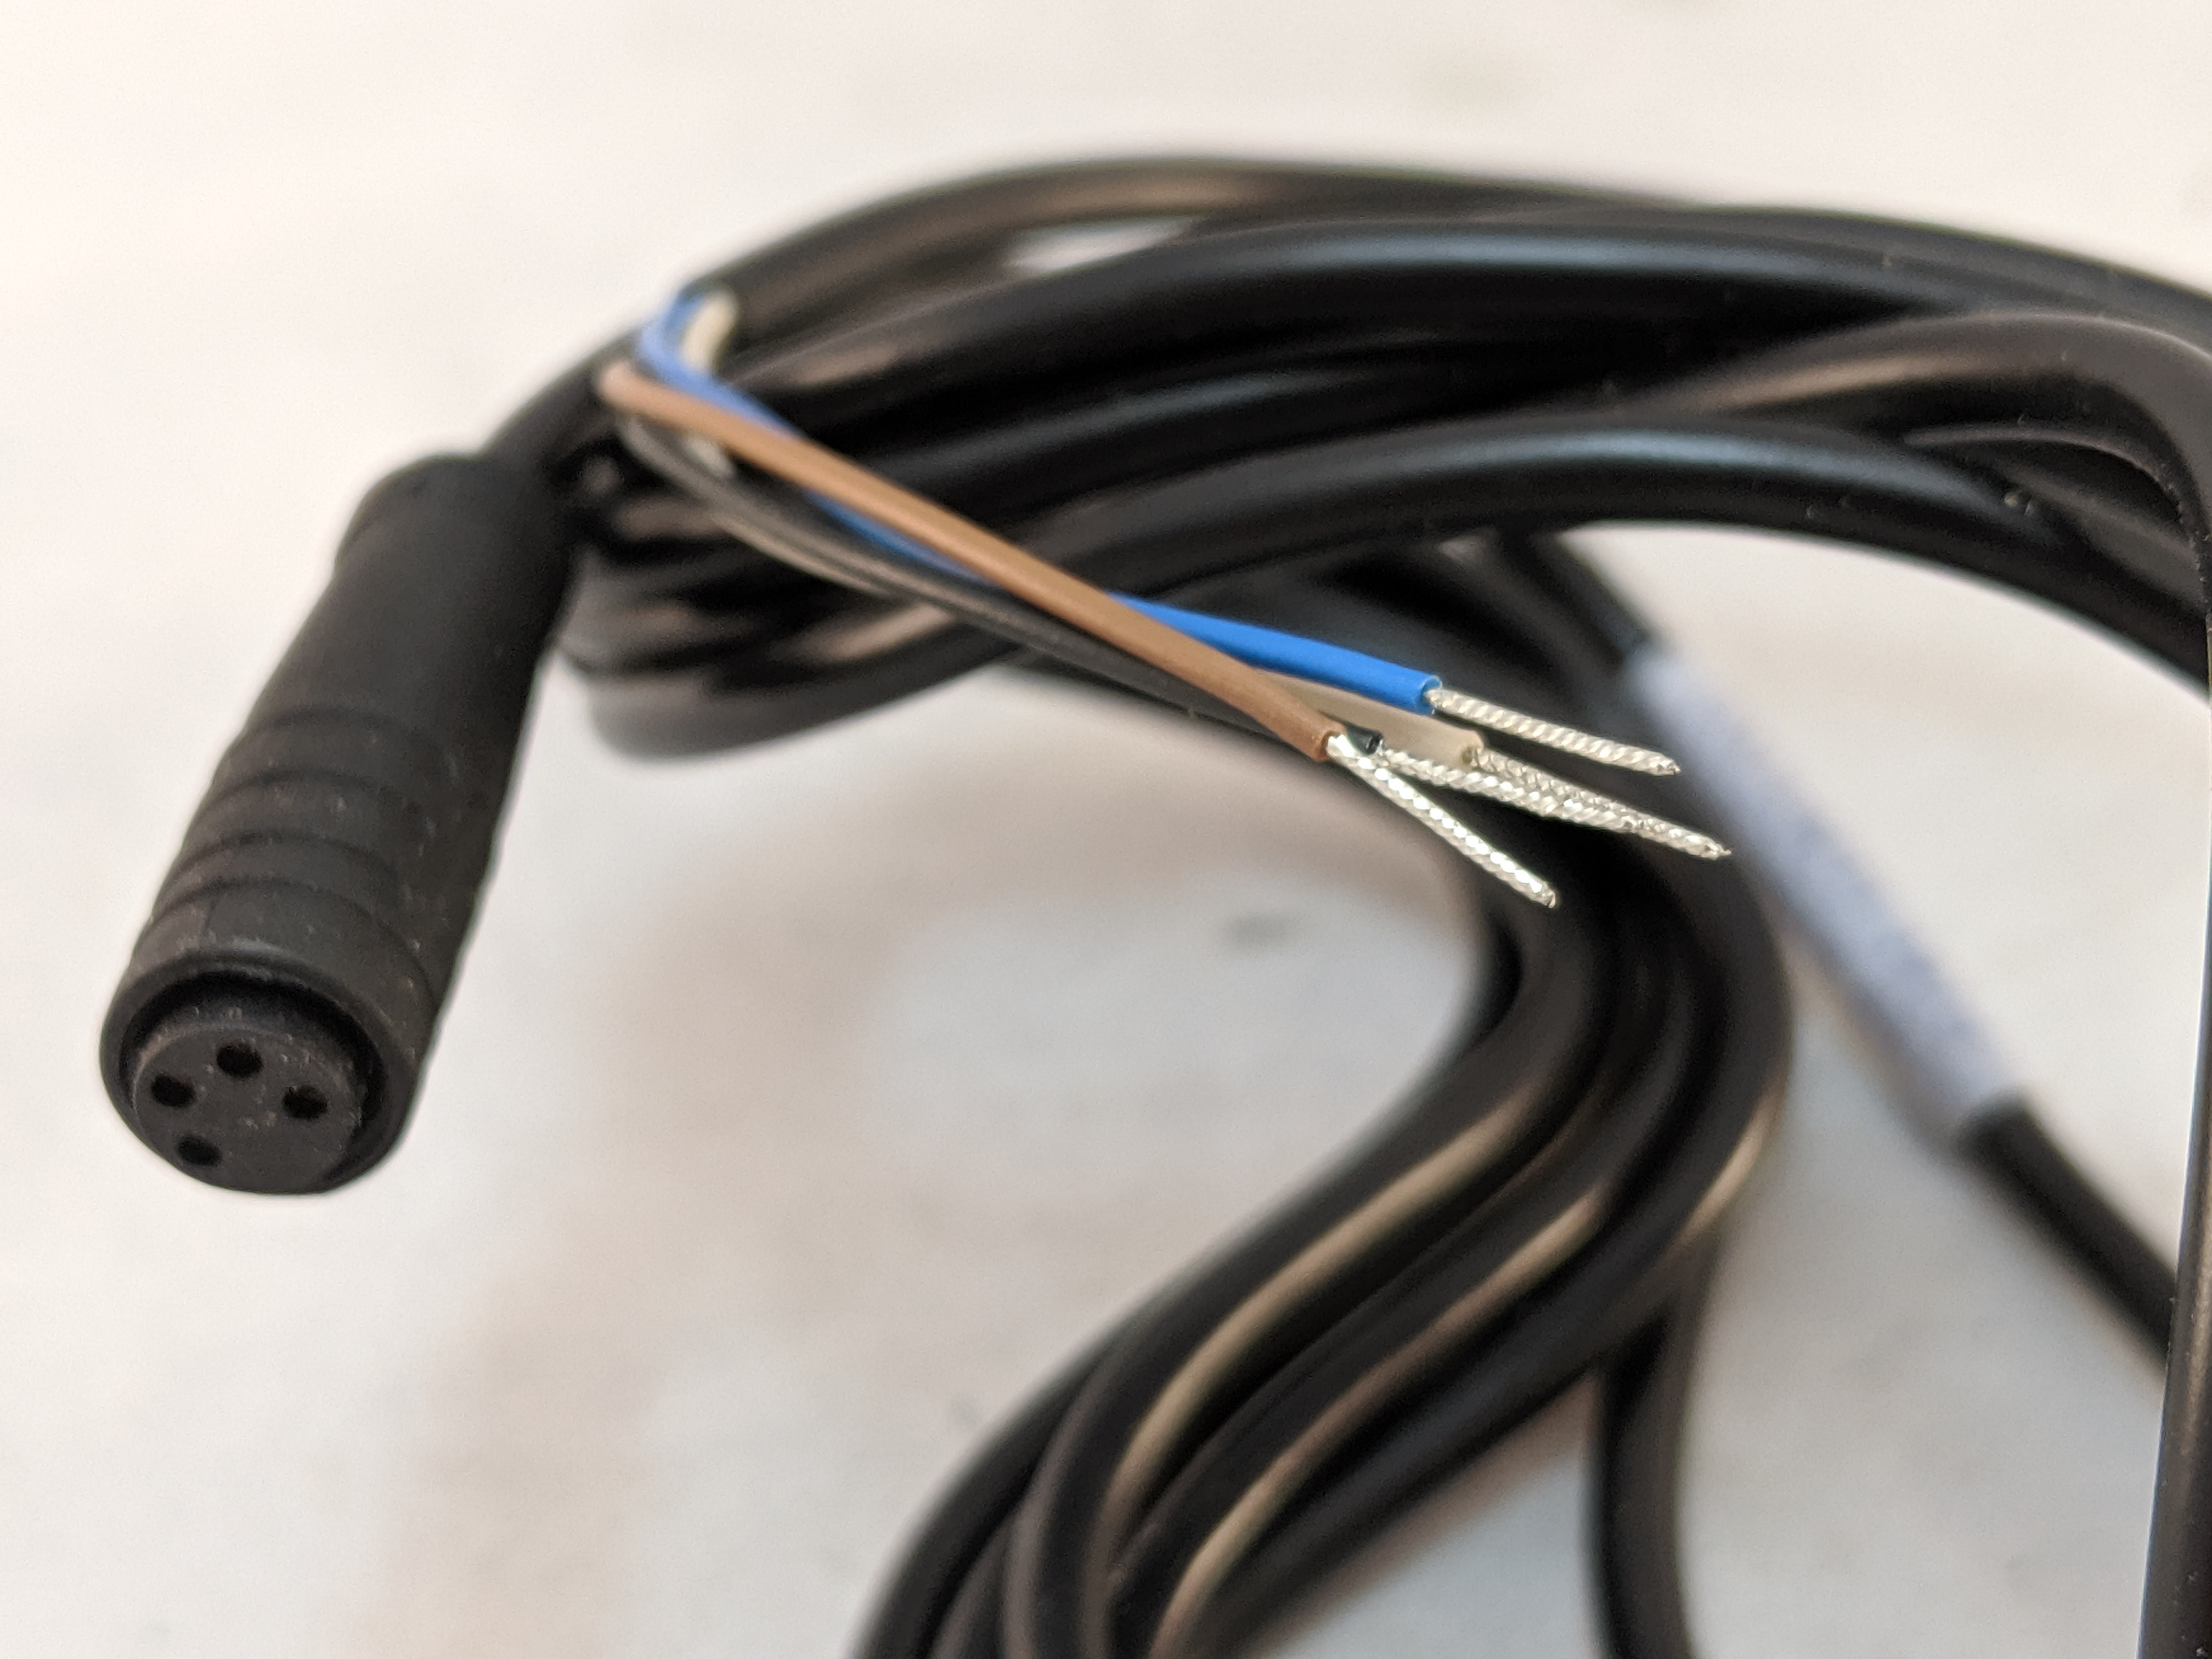 PICO-STYLE QUICK DISCONNECT CONNECTOR &amp; CABLE 2 METER LENGTH